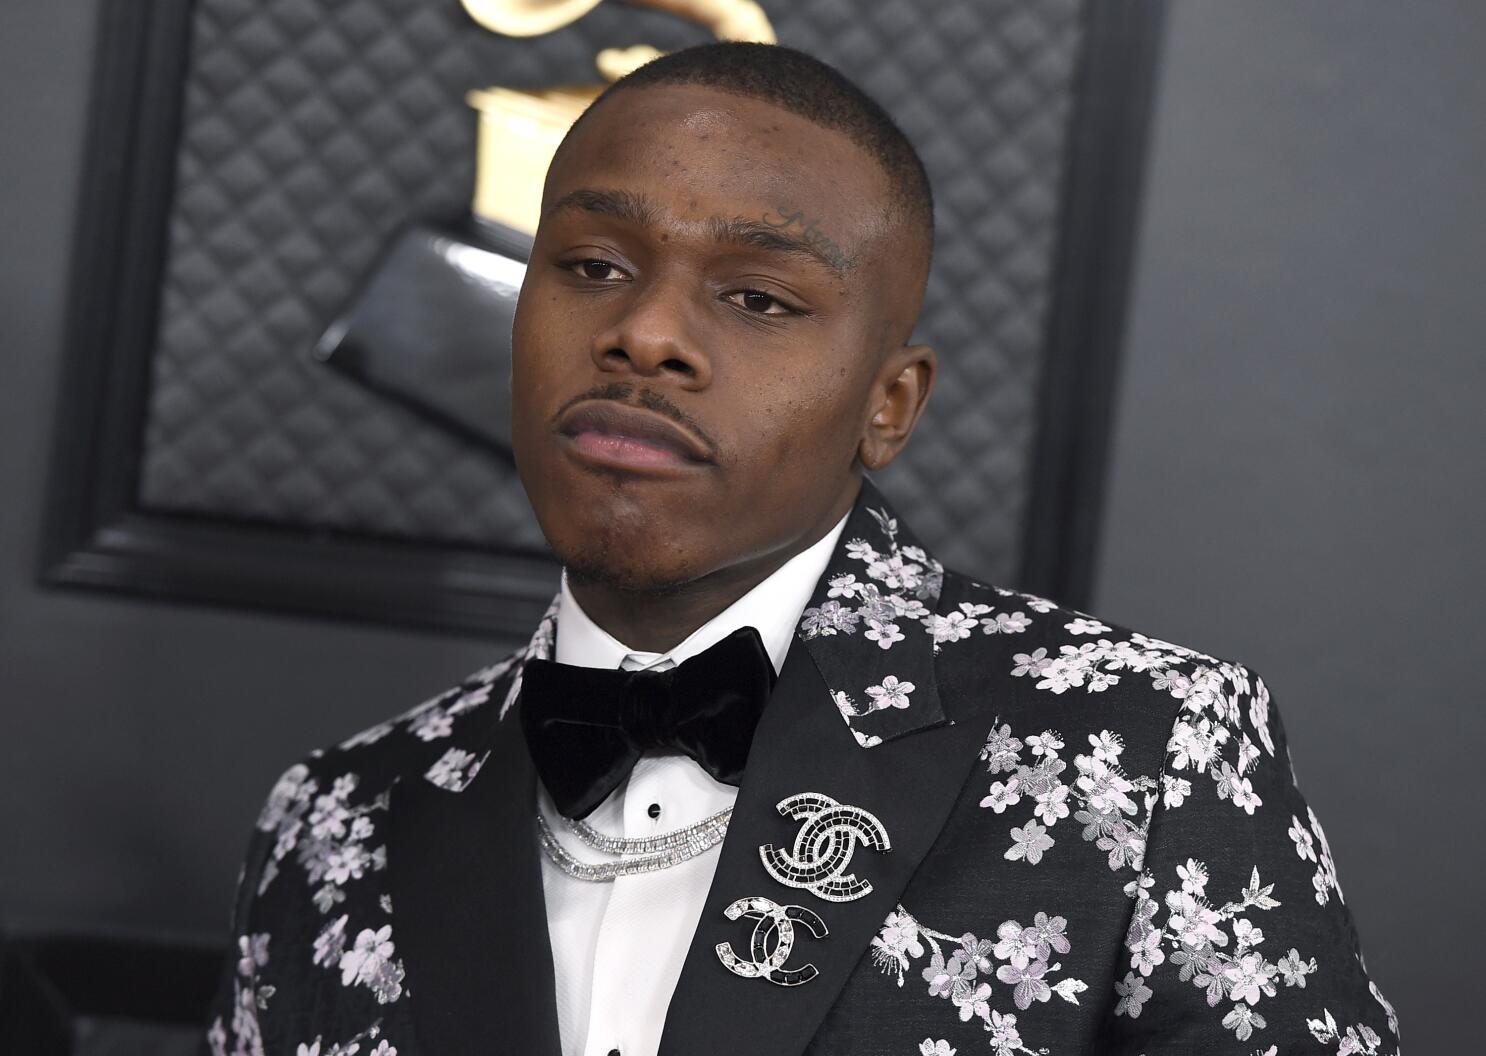 All the festivals that dropped DaBaby after homophobic rant - Los